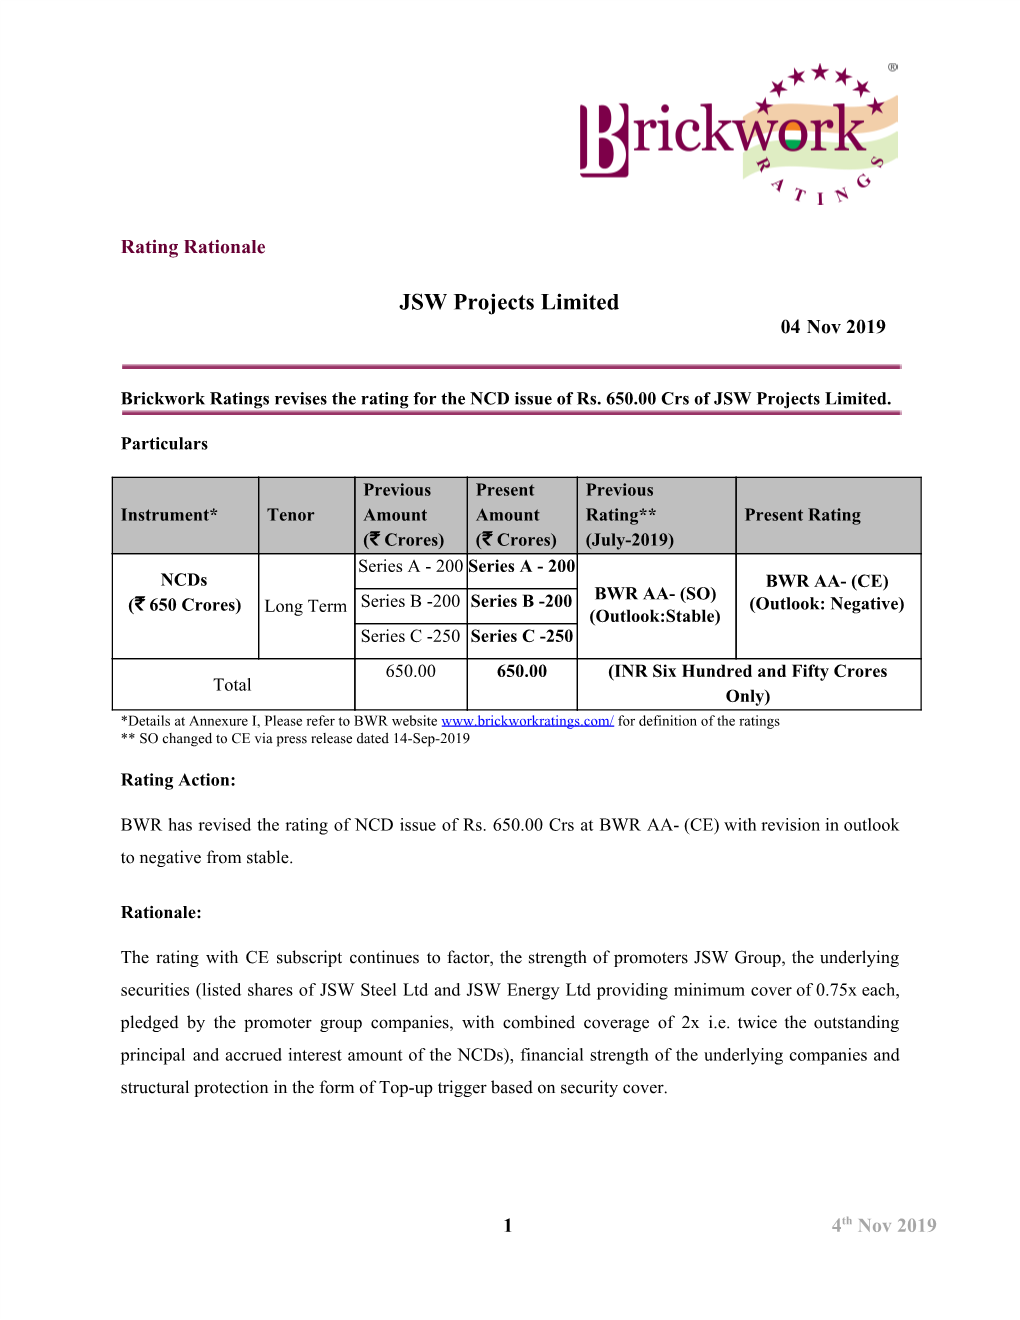 Revision in Credit Rating- JSW Projects Ltd, Nov 2019